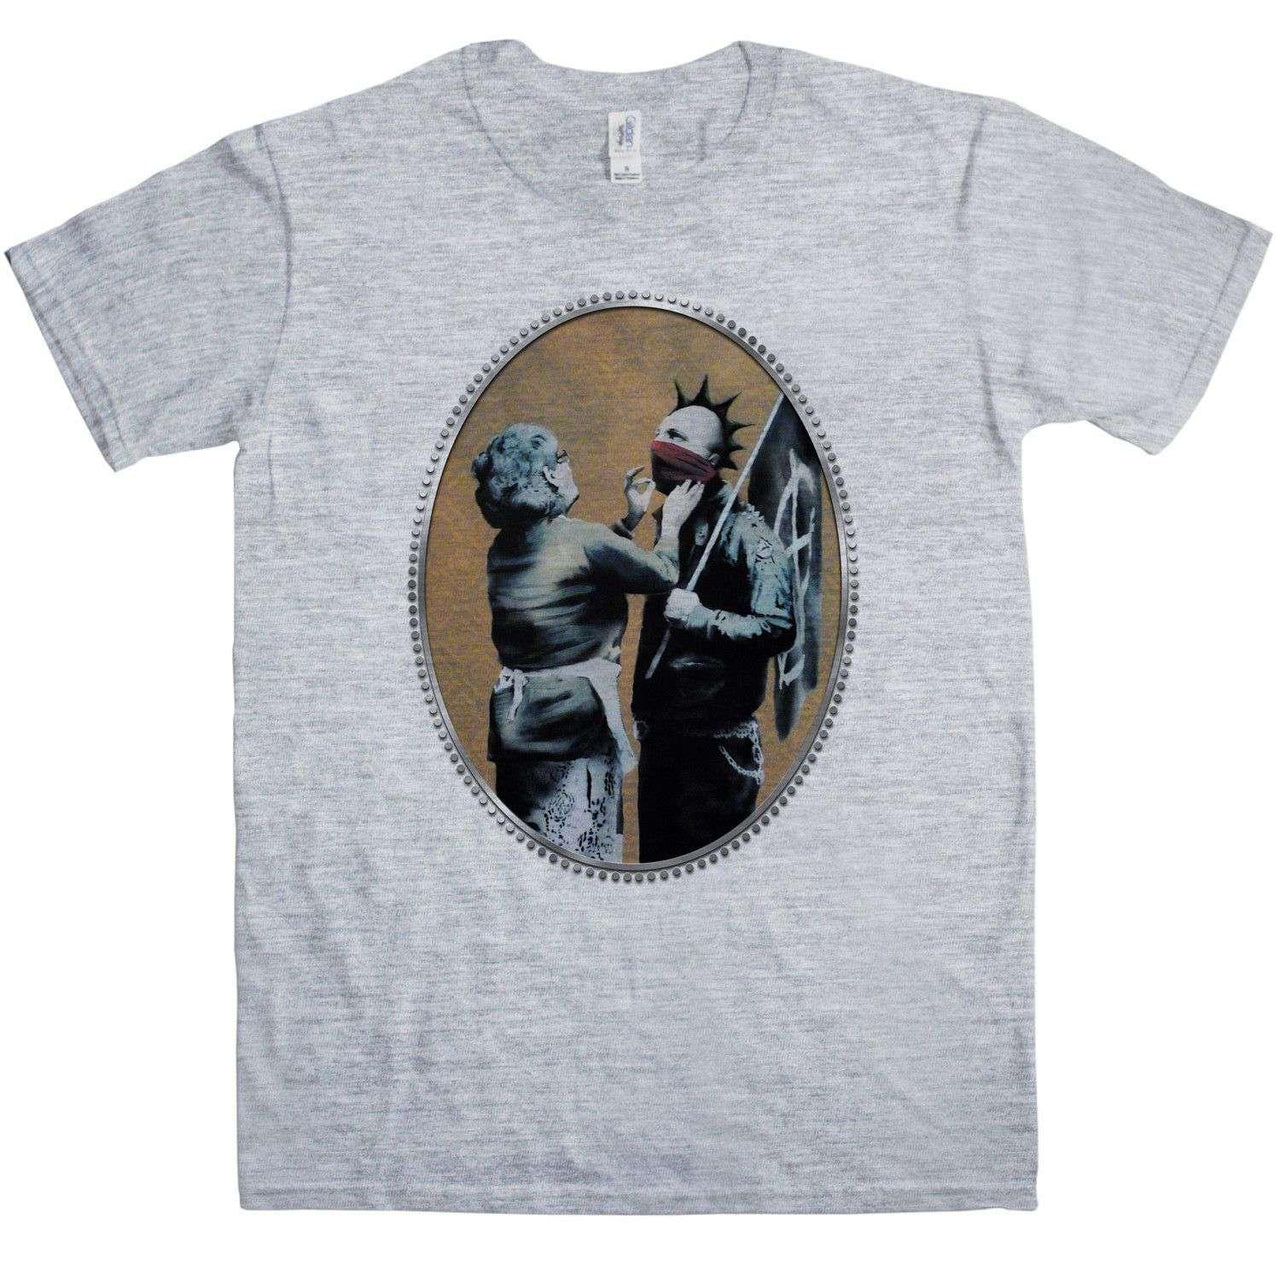 Banksy Anarchist Graphic T-Shirt For Men 8Ball